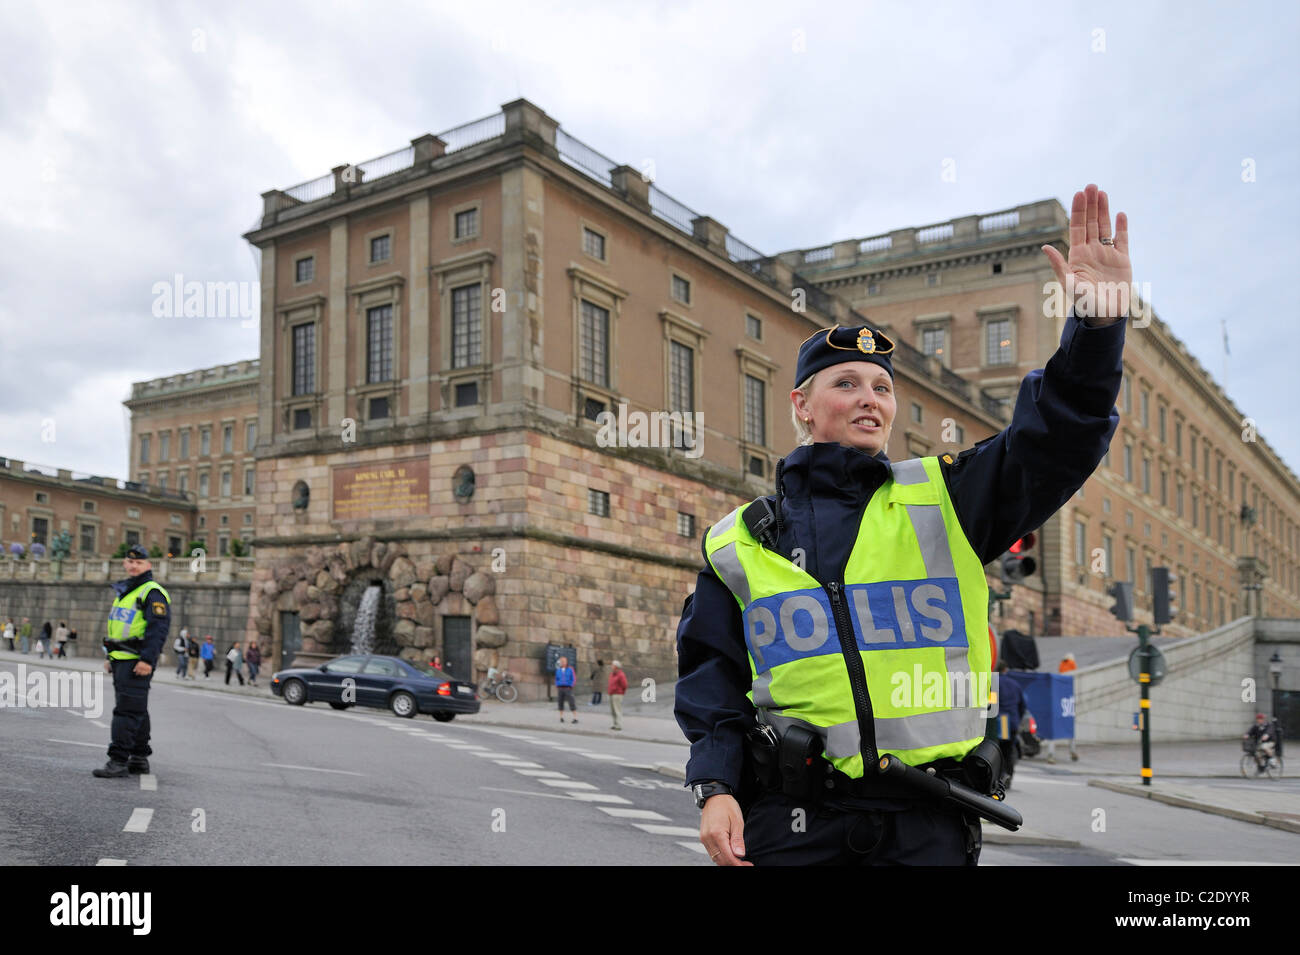 Policewoman regulating the traffic at the Stockholm Palace, Stockholms Lan, Sweden Stock Photo